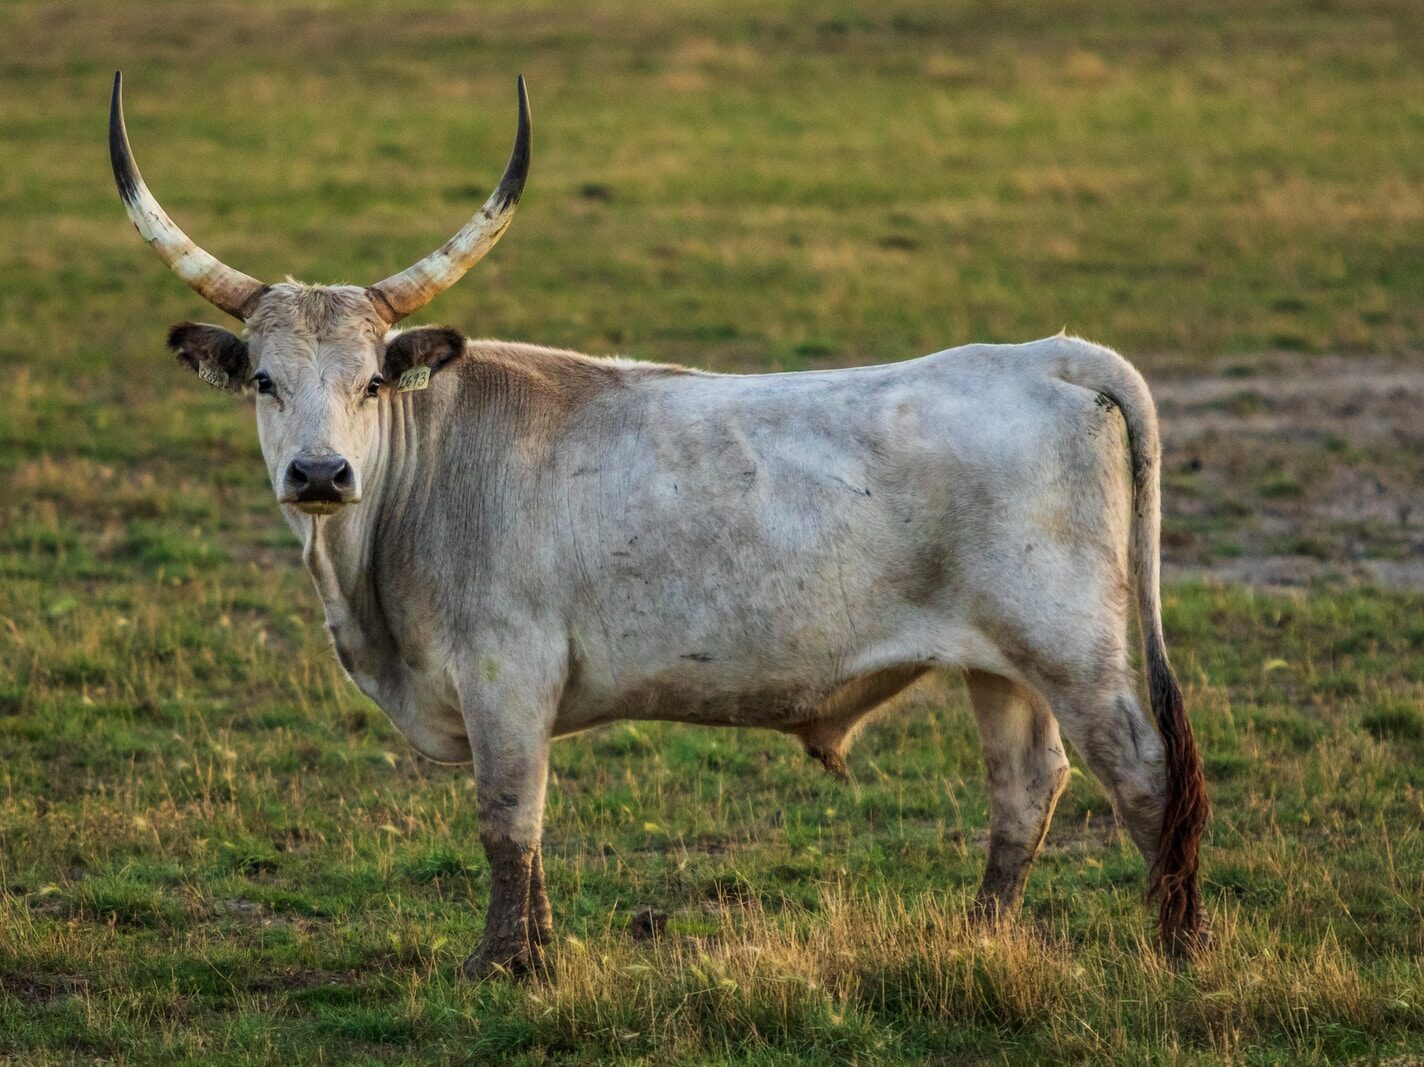 white and brown cattle